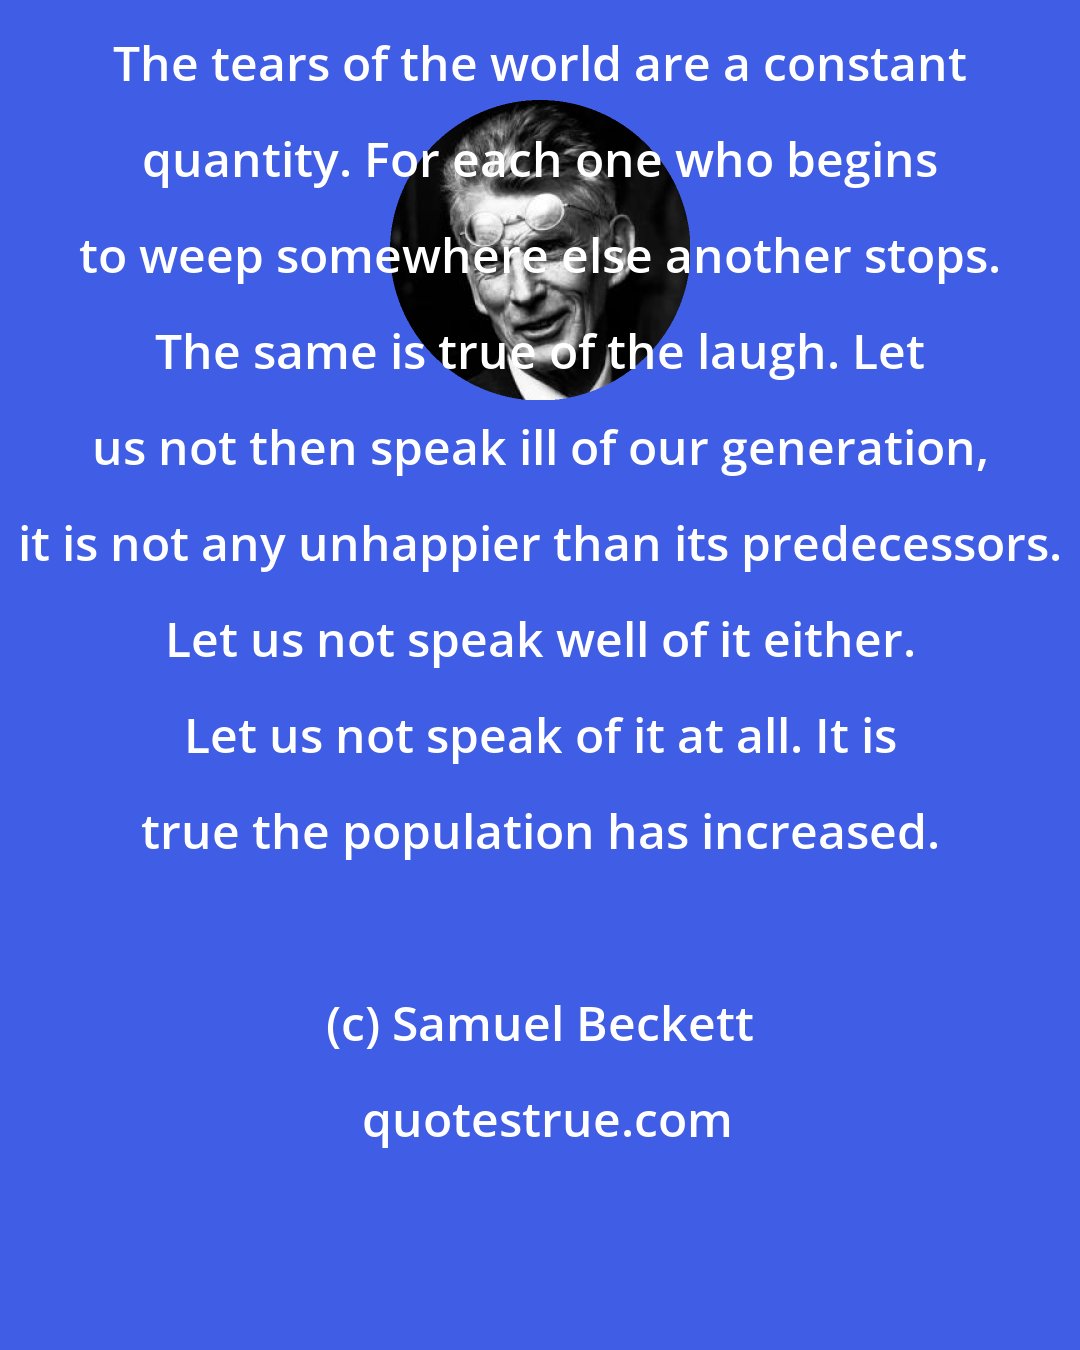 Samuel Beckett: The tears of the world are a constant quantity. For each one who begins to weep somewhere else another stops. The same is true of the laugh. Let us not then speak ill of our generation, it is not any unhappier than its predecessors. Let us not speak well of it either. Let us not speak of it at all. It is true the population has increased.